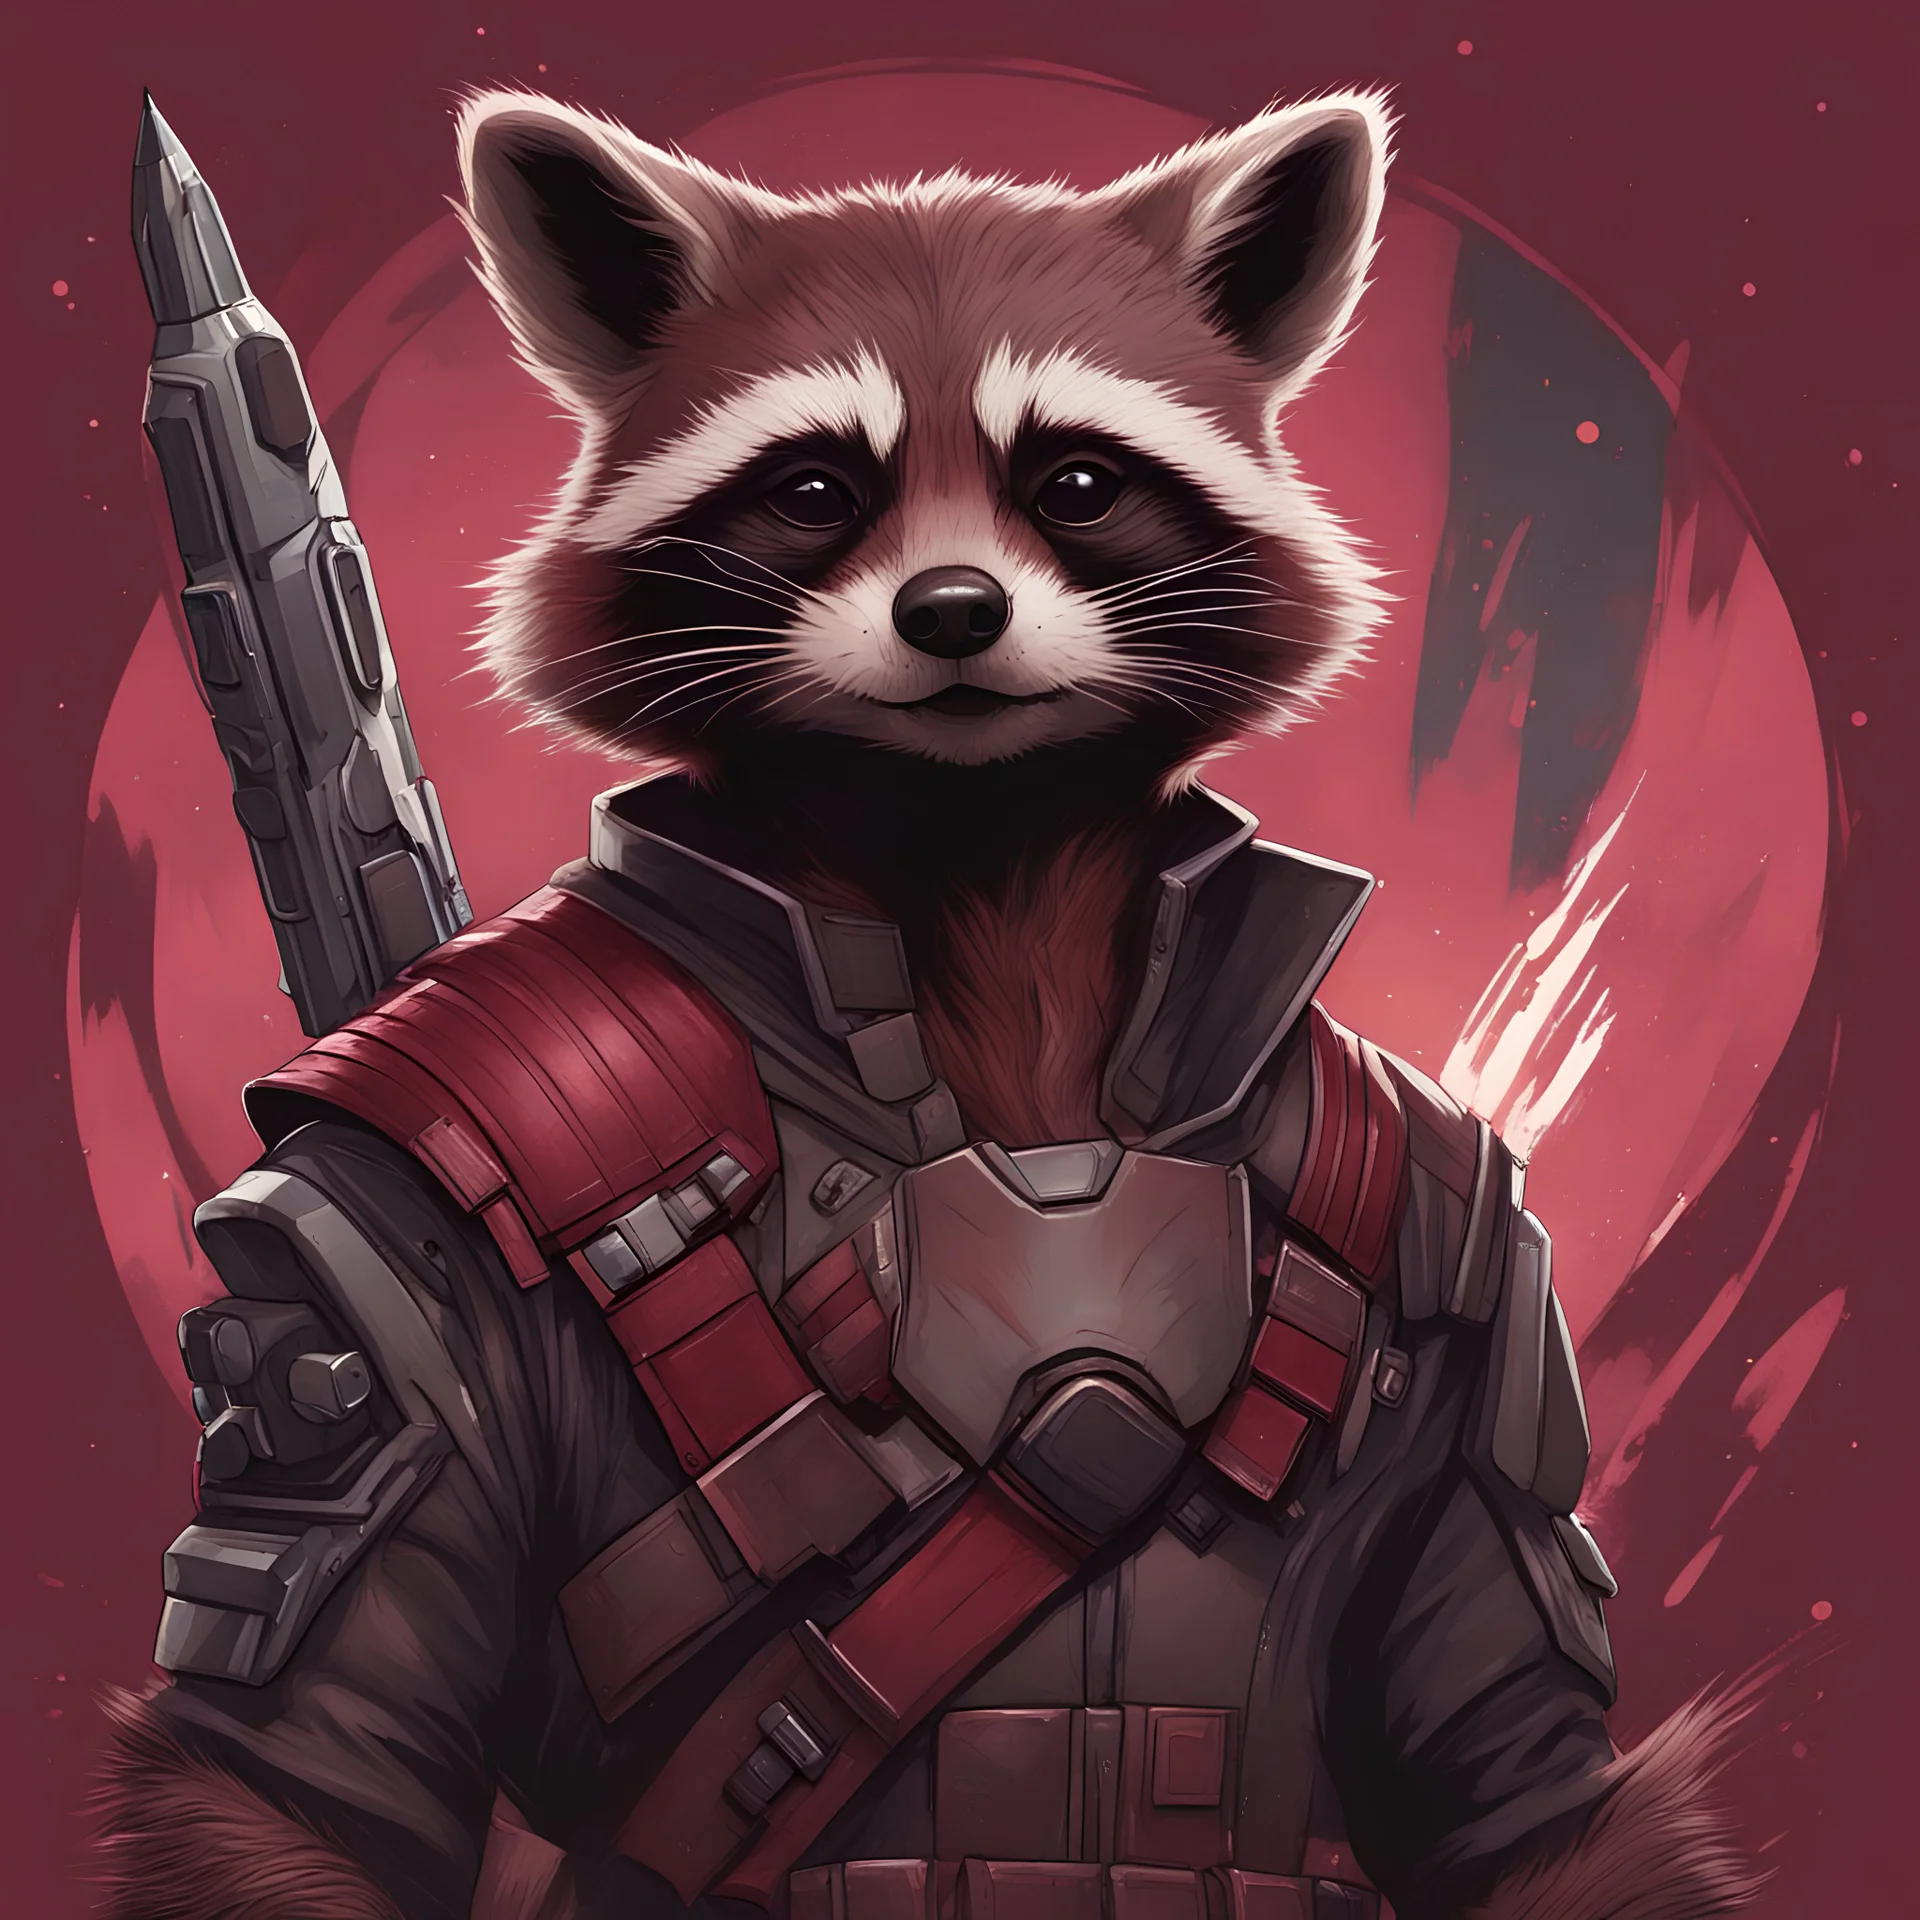 Rocket Raccoon with maroon and black palette with background in nouveau realism art style